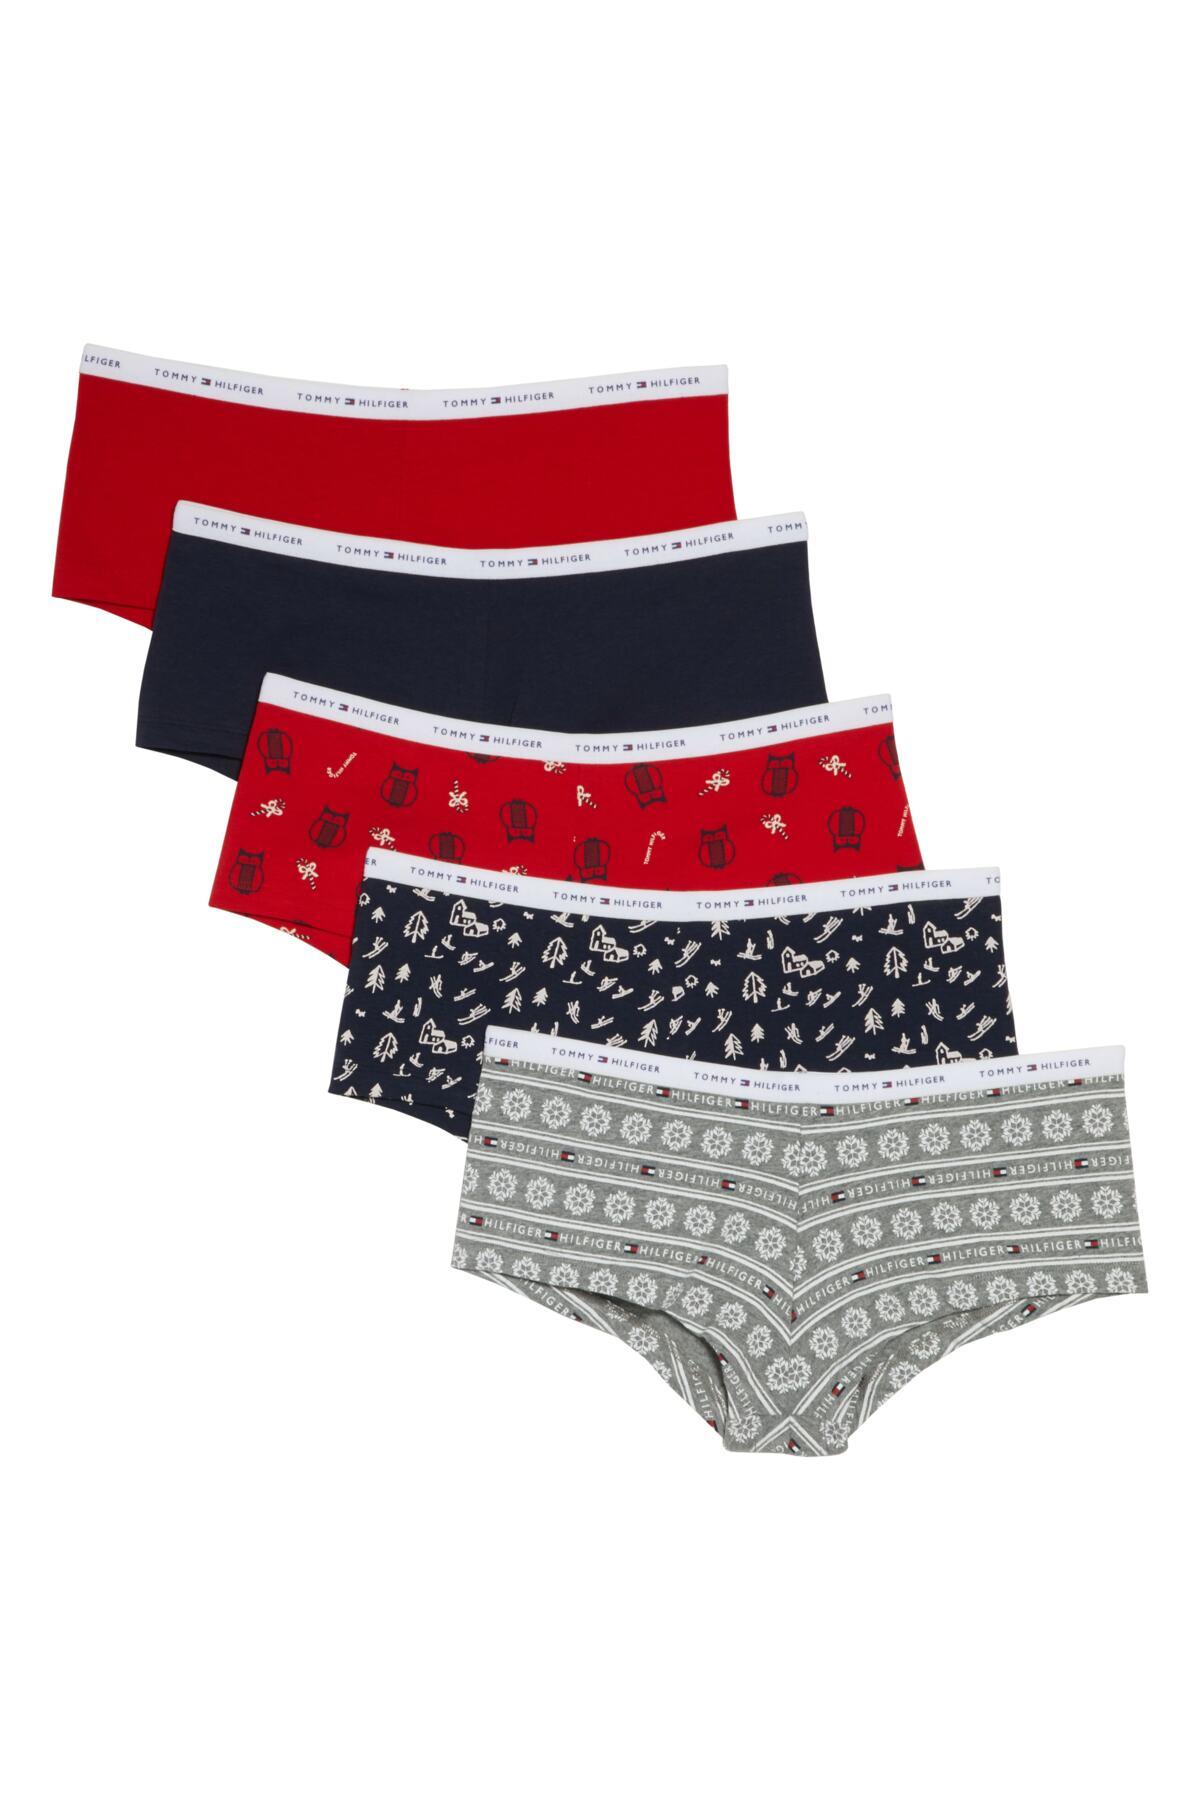 Details about   TOMMY HILFIGER Women's 2 Pack Boyshort Underwear Panty Perfect Gift 